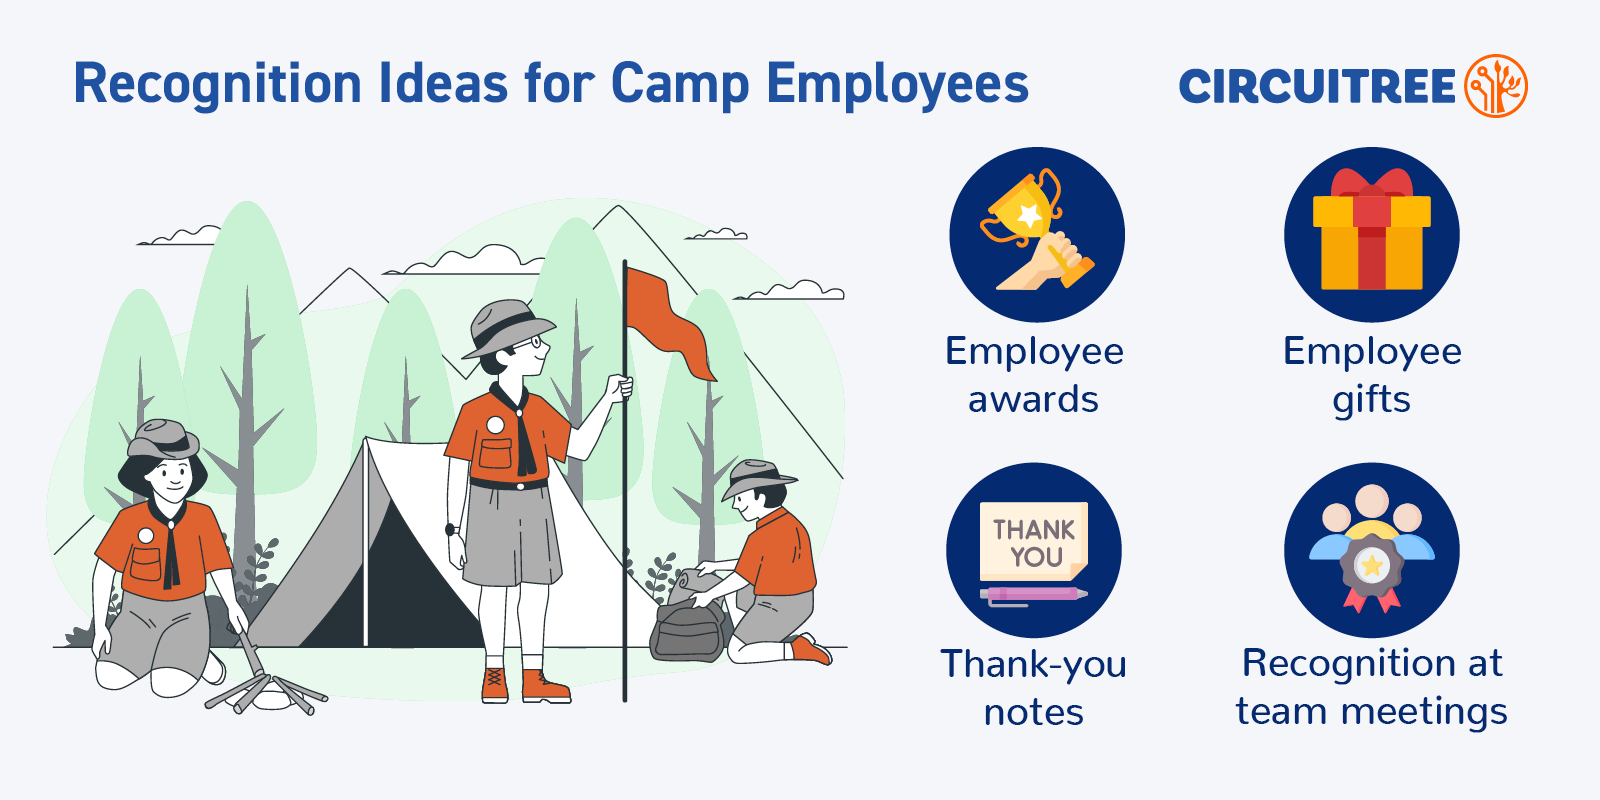 This image depicts 4 employee recognition ideas for camps, explained below.